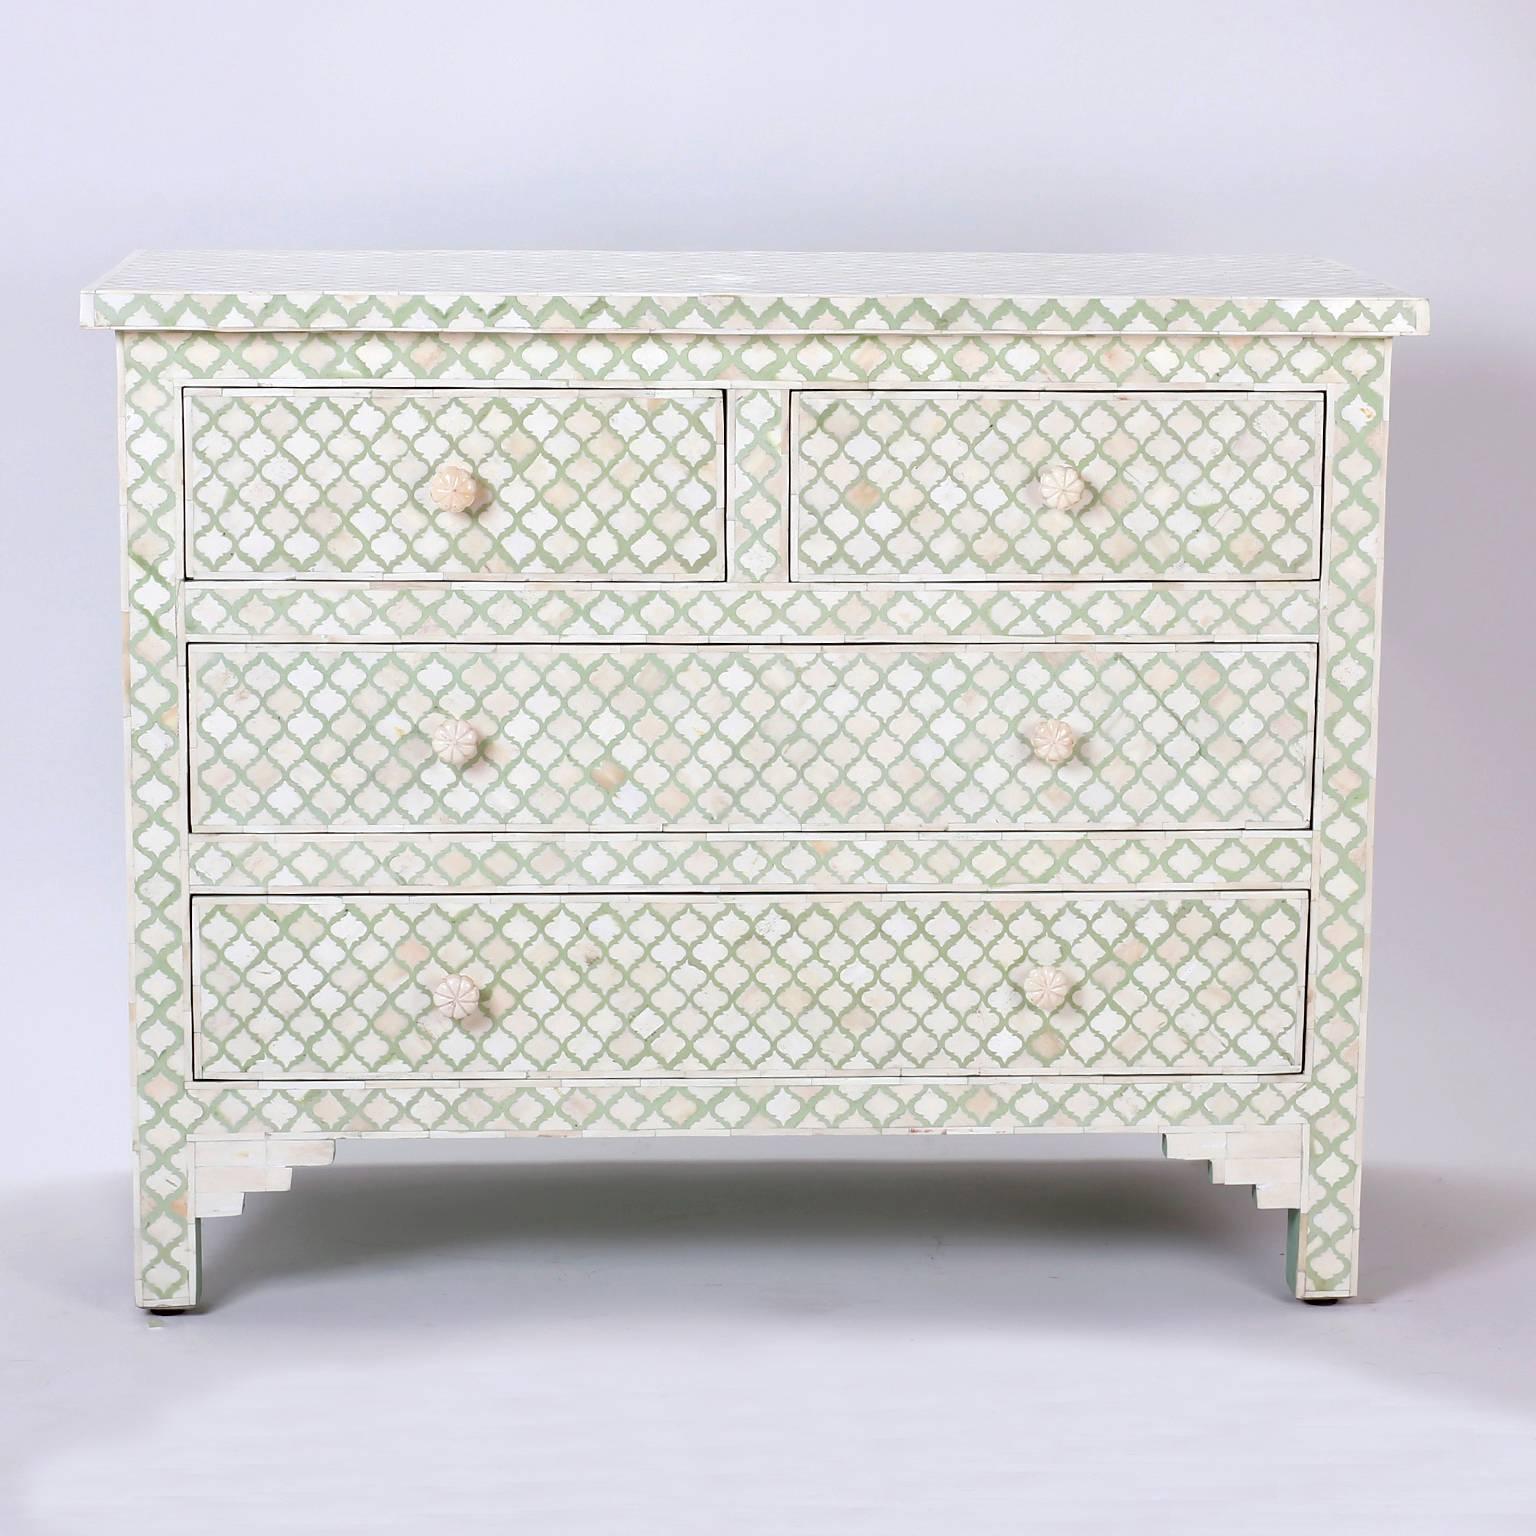 Stand out Indian chest of drawers with dyed green and natural bone inlaid in a repeating cartouche mosaic design throughout. Having Classic form, charming floral pulls, and stylized bracket feet.
 